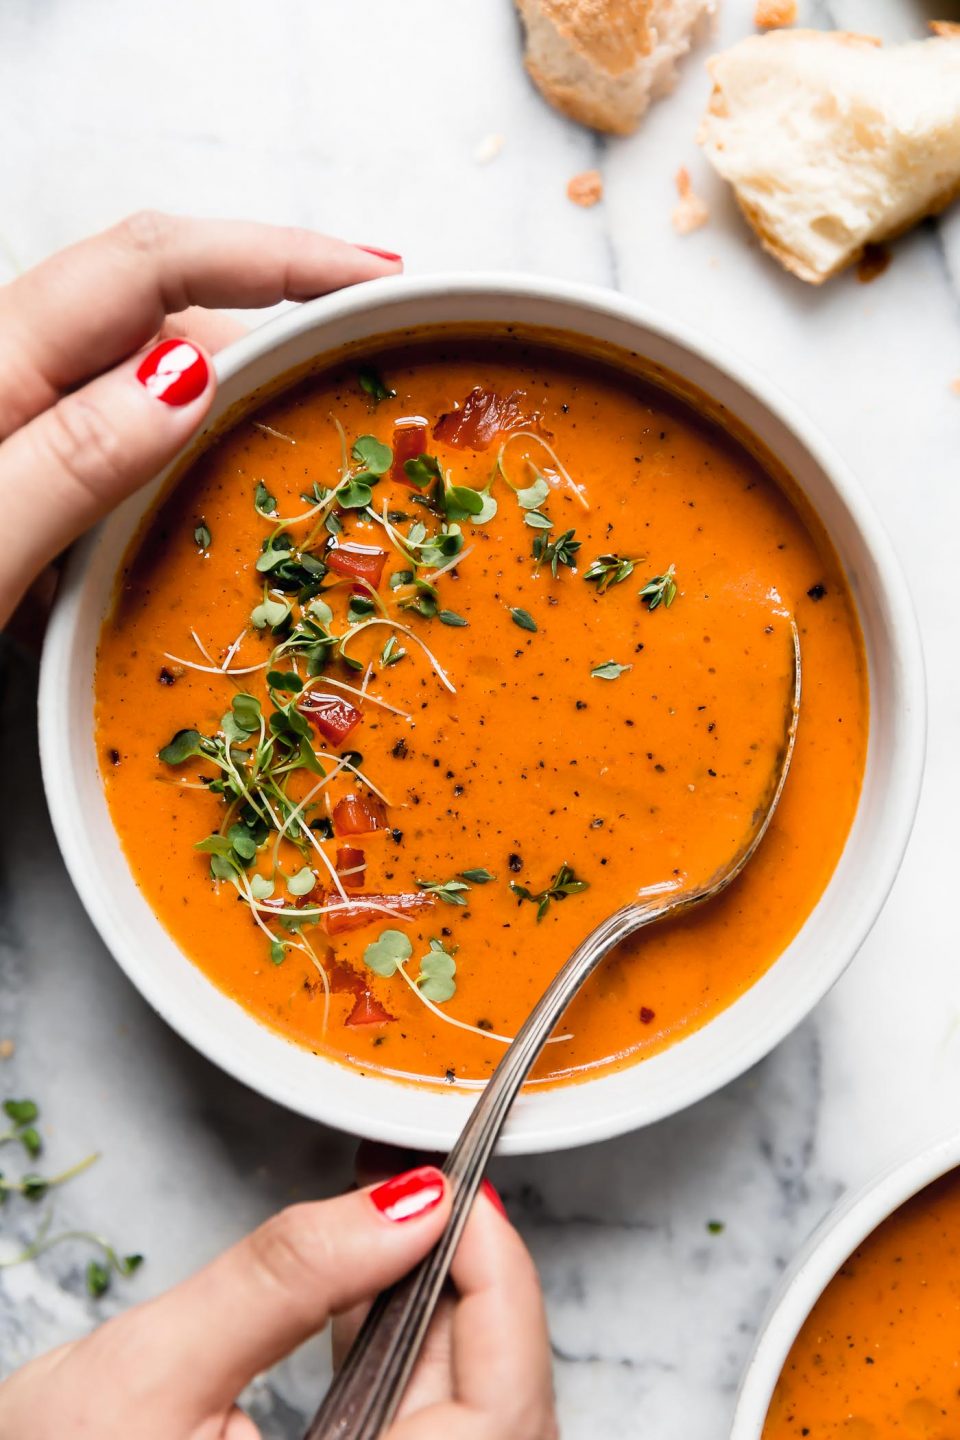 Creamy Roasted Red Pepper soup in a white ceramic bowl, topped with microgreens and cracked black pepper. The bowl is surrounded by some pieces of crusty bread, and a second bowl of soup. They are sitting atop a white marble surface. A woman's manicured hands are reaching in to take a spoonful of soup out of the bowl. 